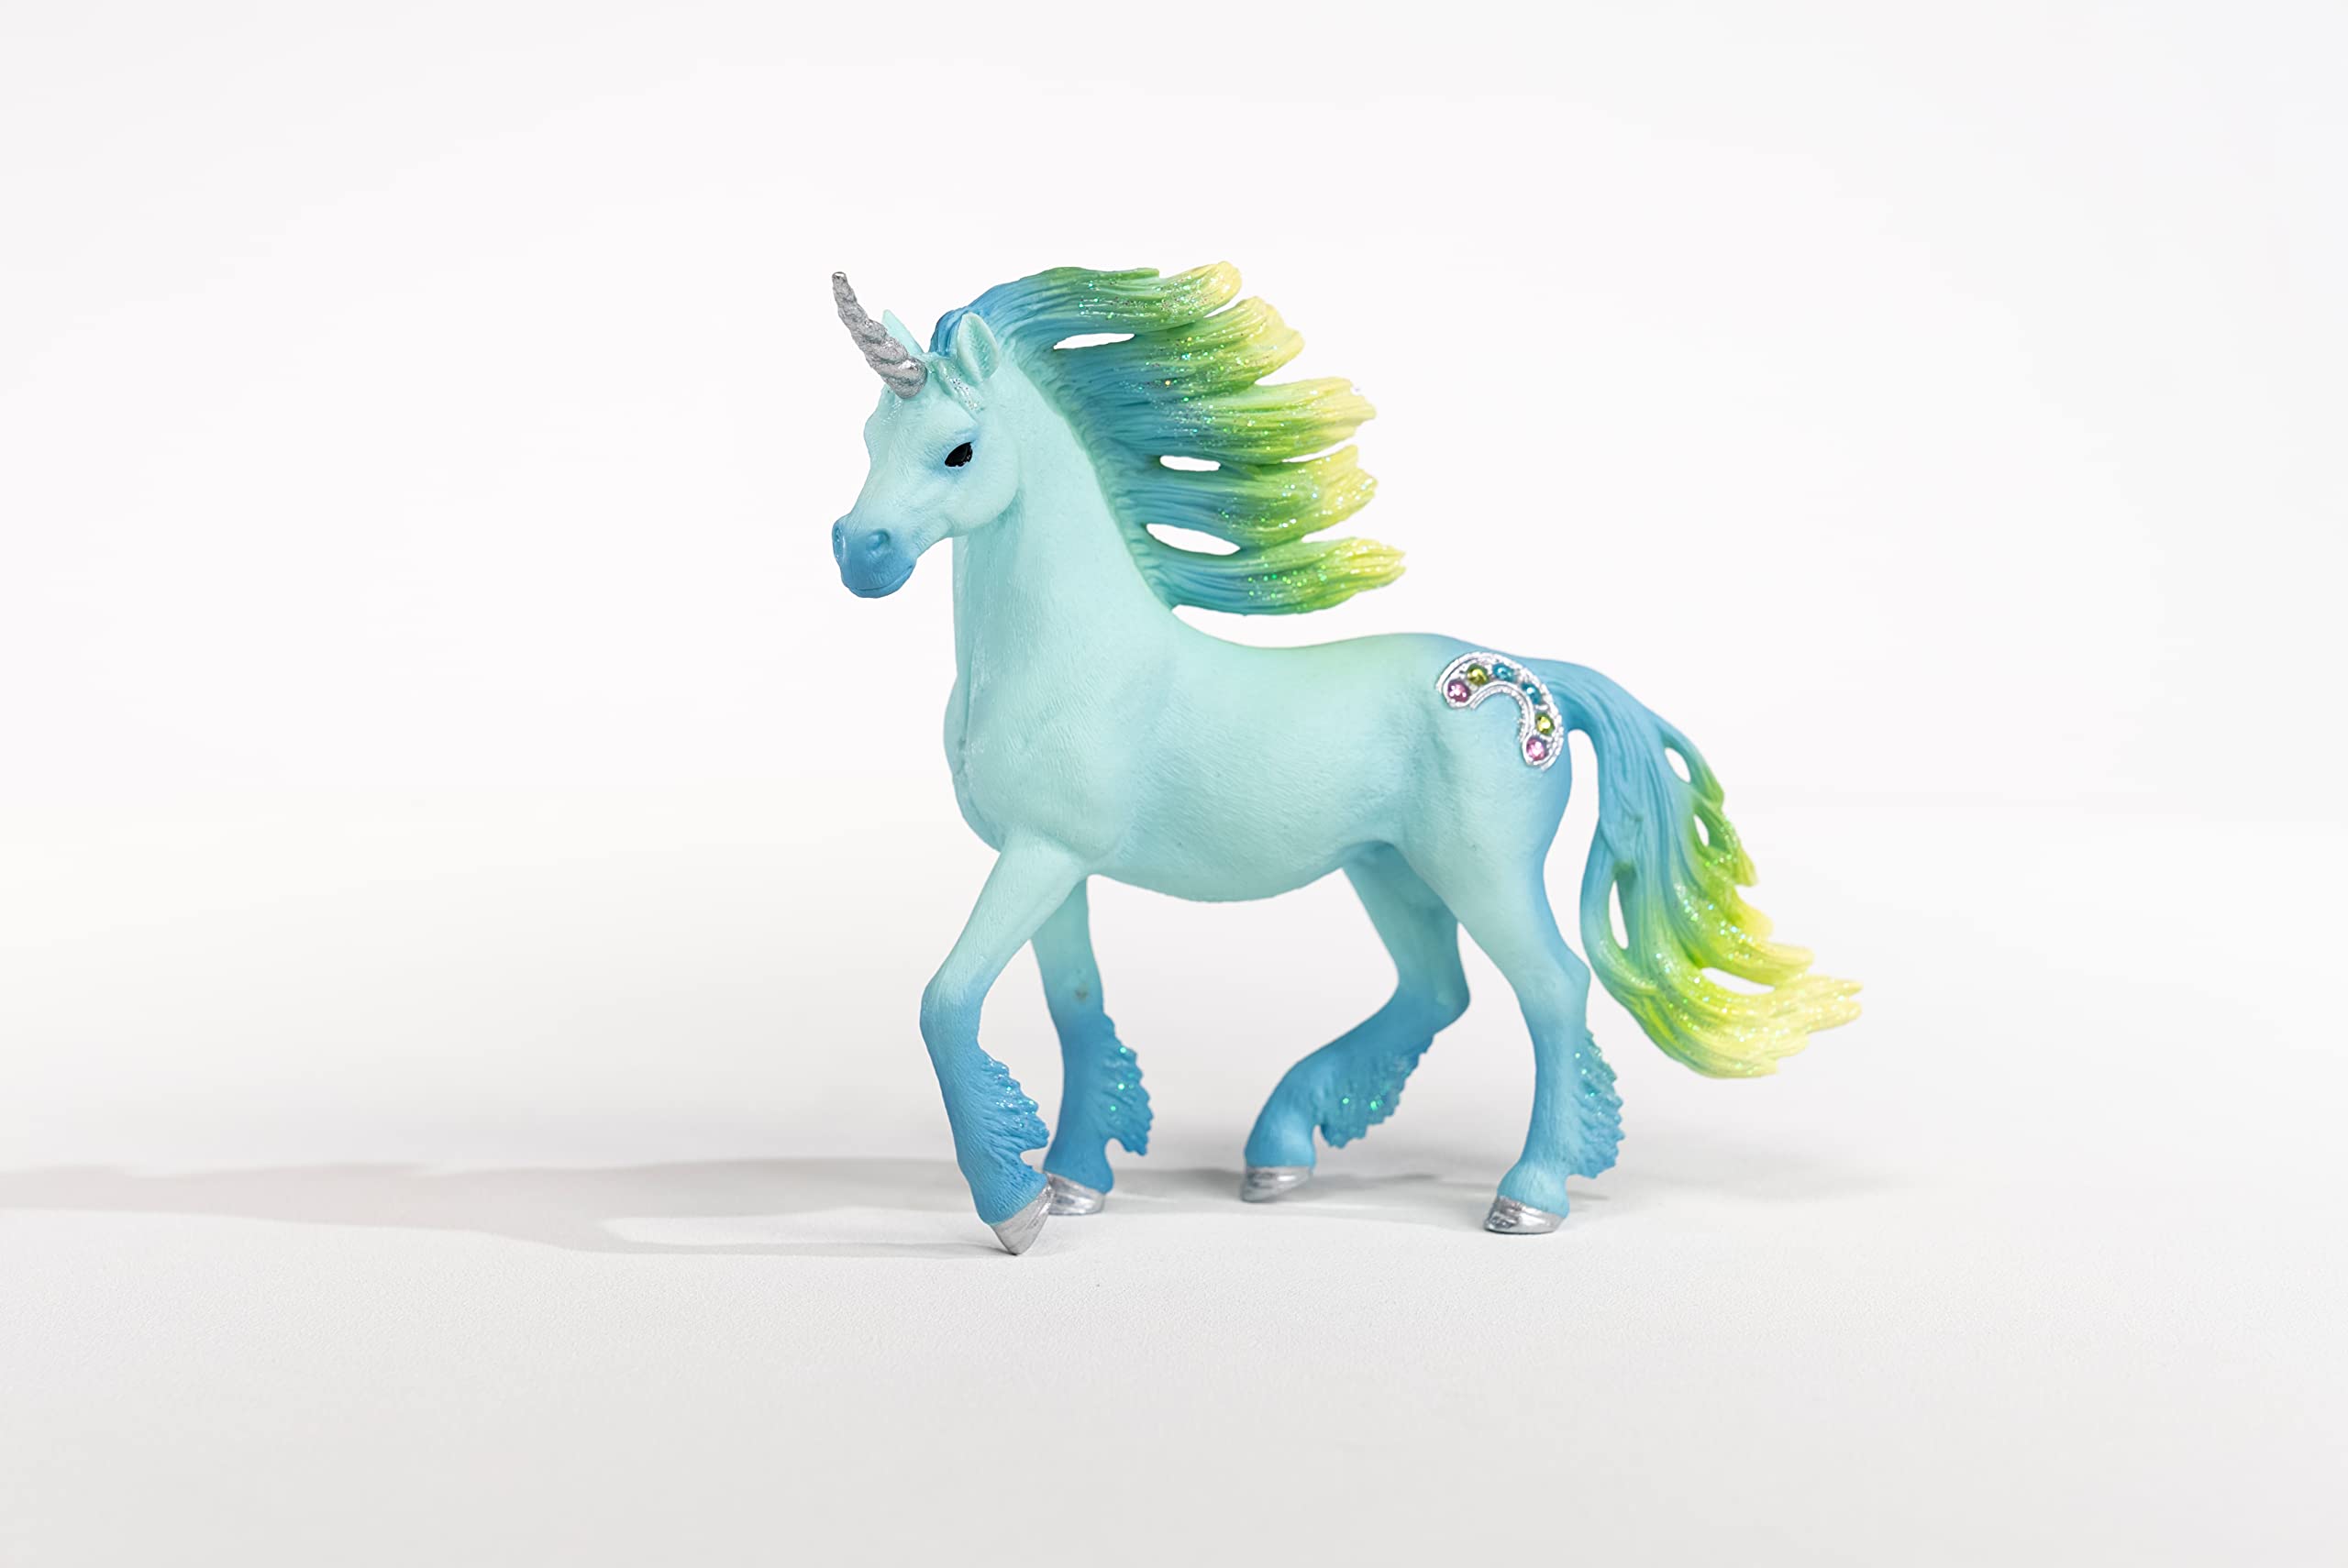 Schleich bayala, Unicorn Toys for Girls and Boys, Marshmallow Unicorn Stallion, Blue and Green ,with Gems, Ages 5+